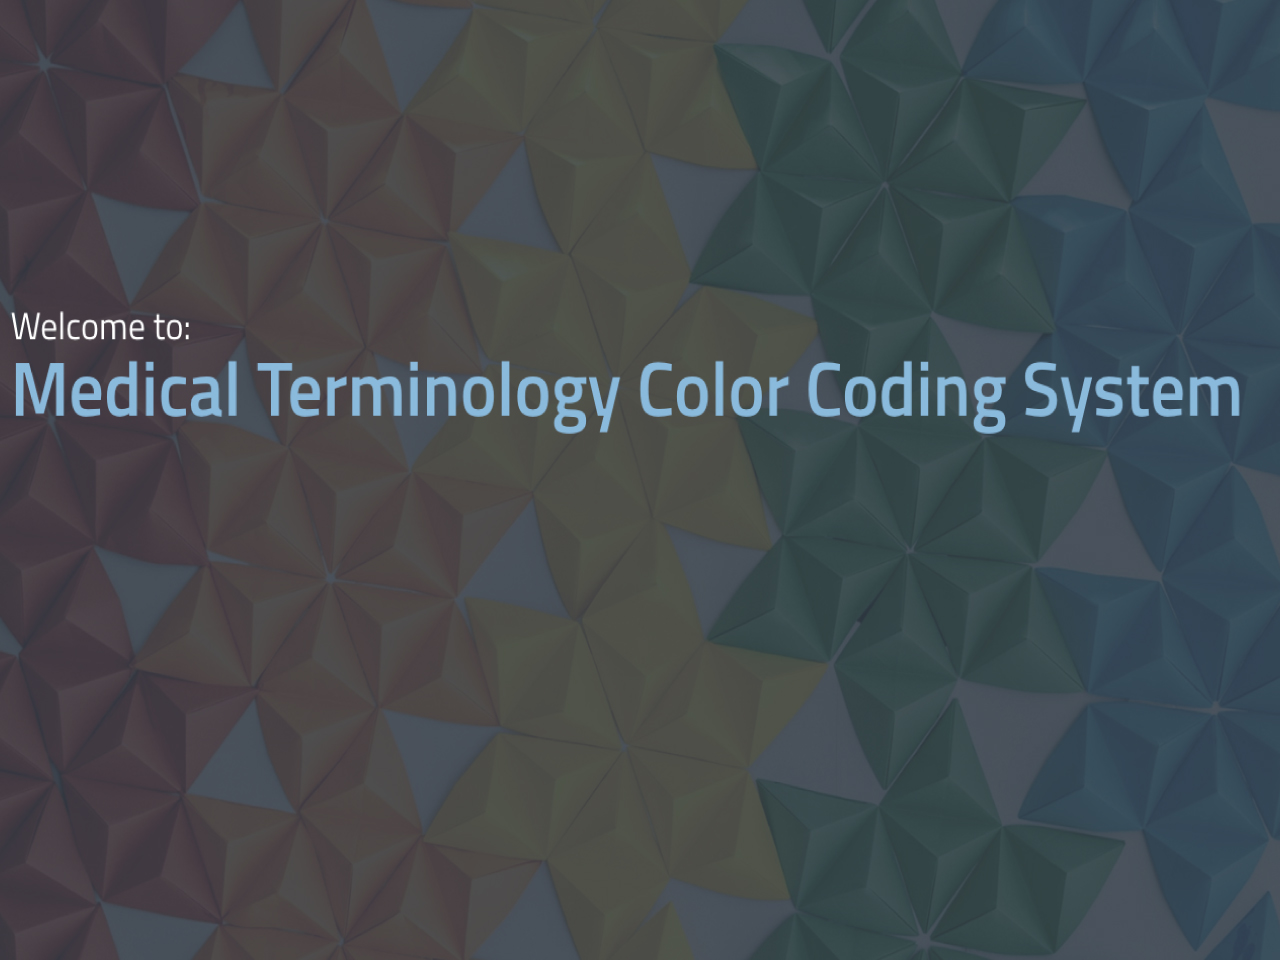 The Colors of Medical Terminology